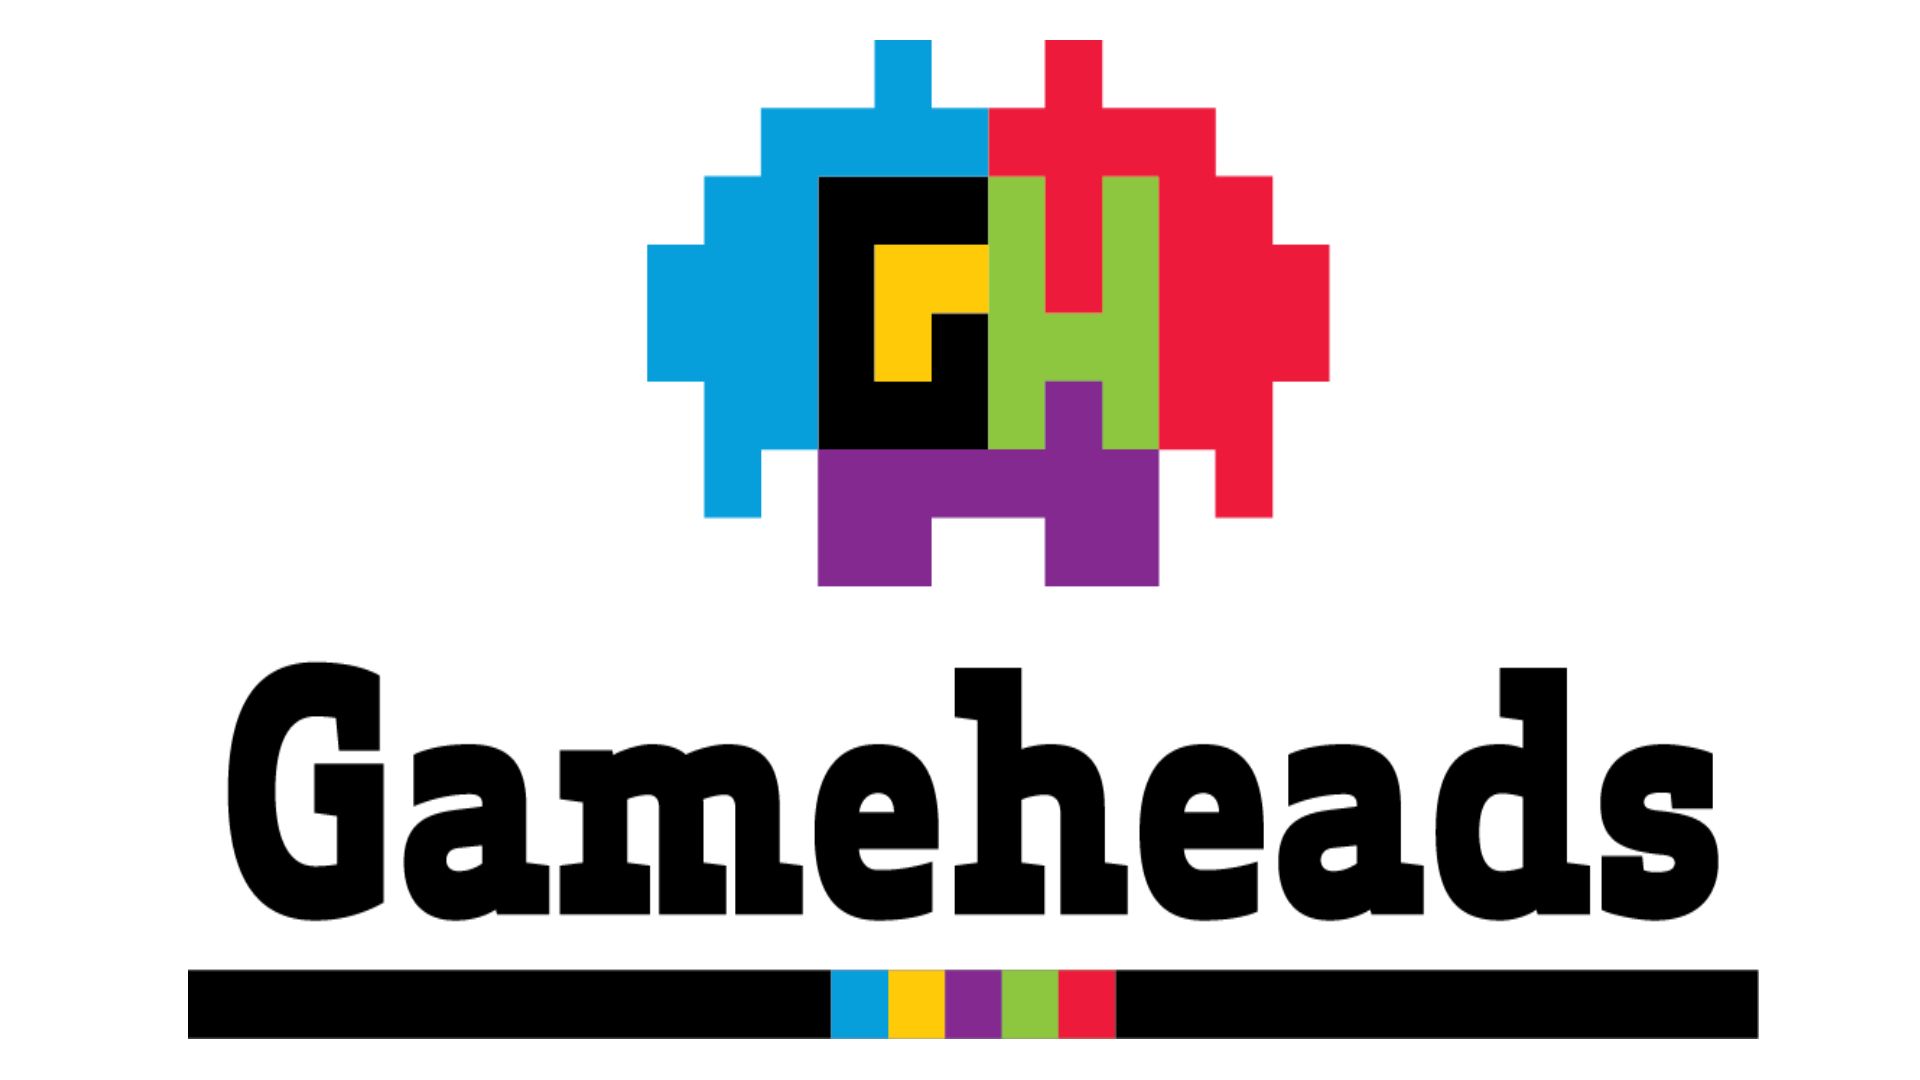 Gameheads Logo with black text and a pixelated brain with multiple colors and the word “Gameheads”.